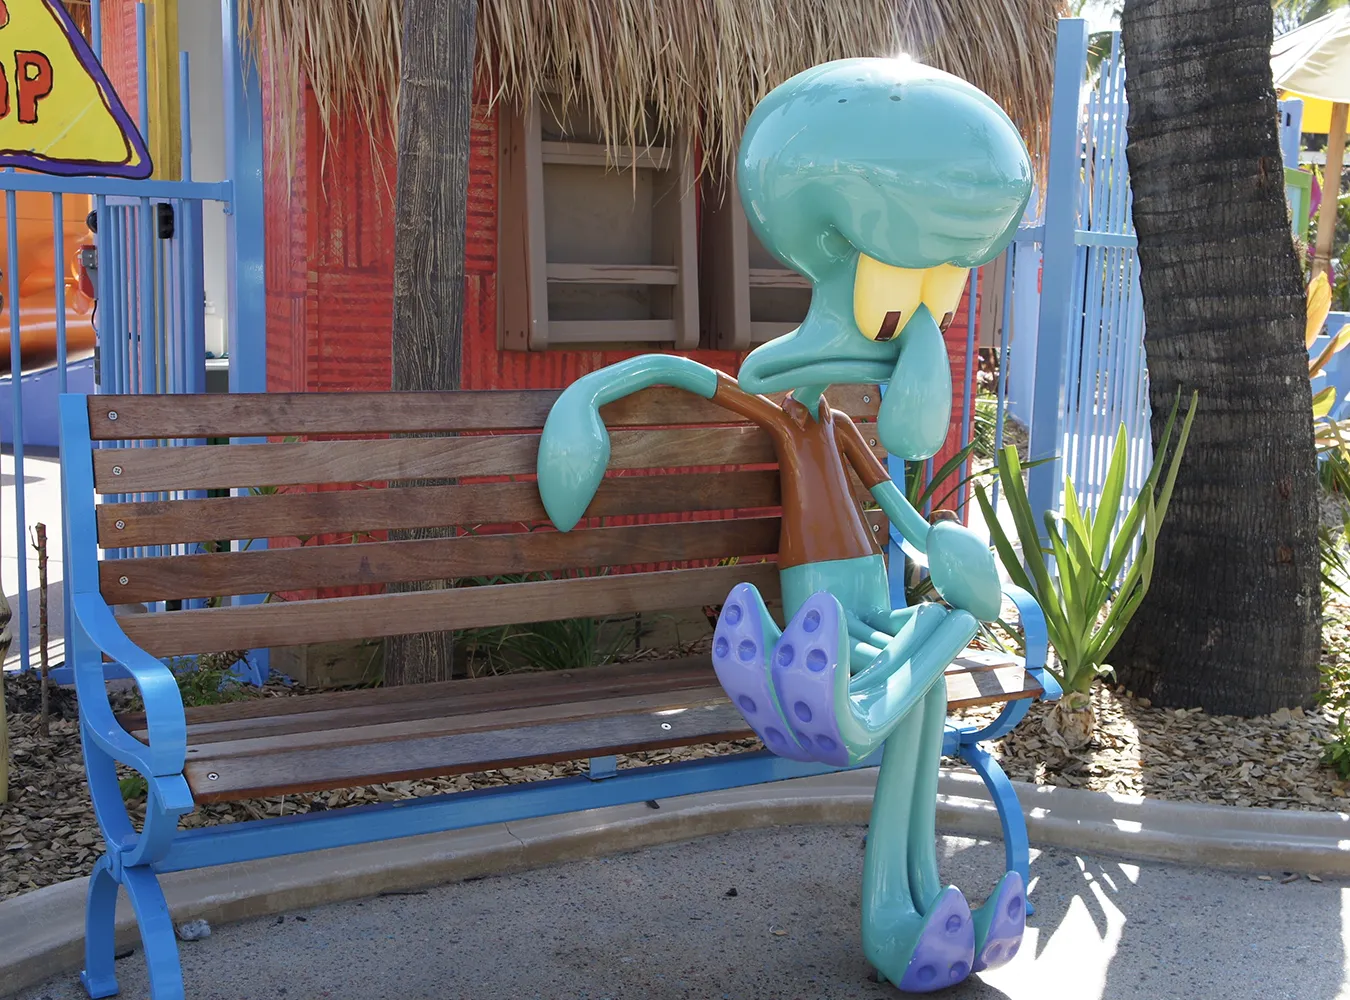 Large turquoise sculpture of Squidward from SpongeBob SquarePants sitting on a park bench.